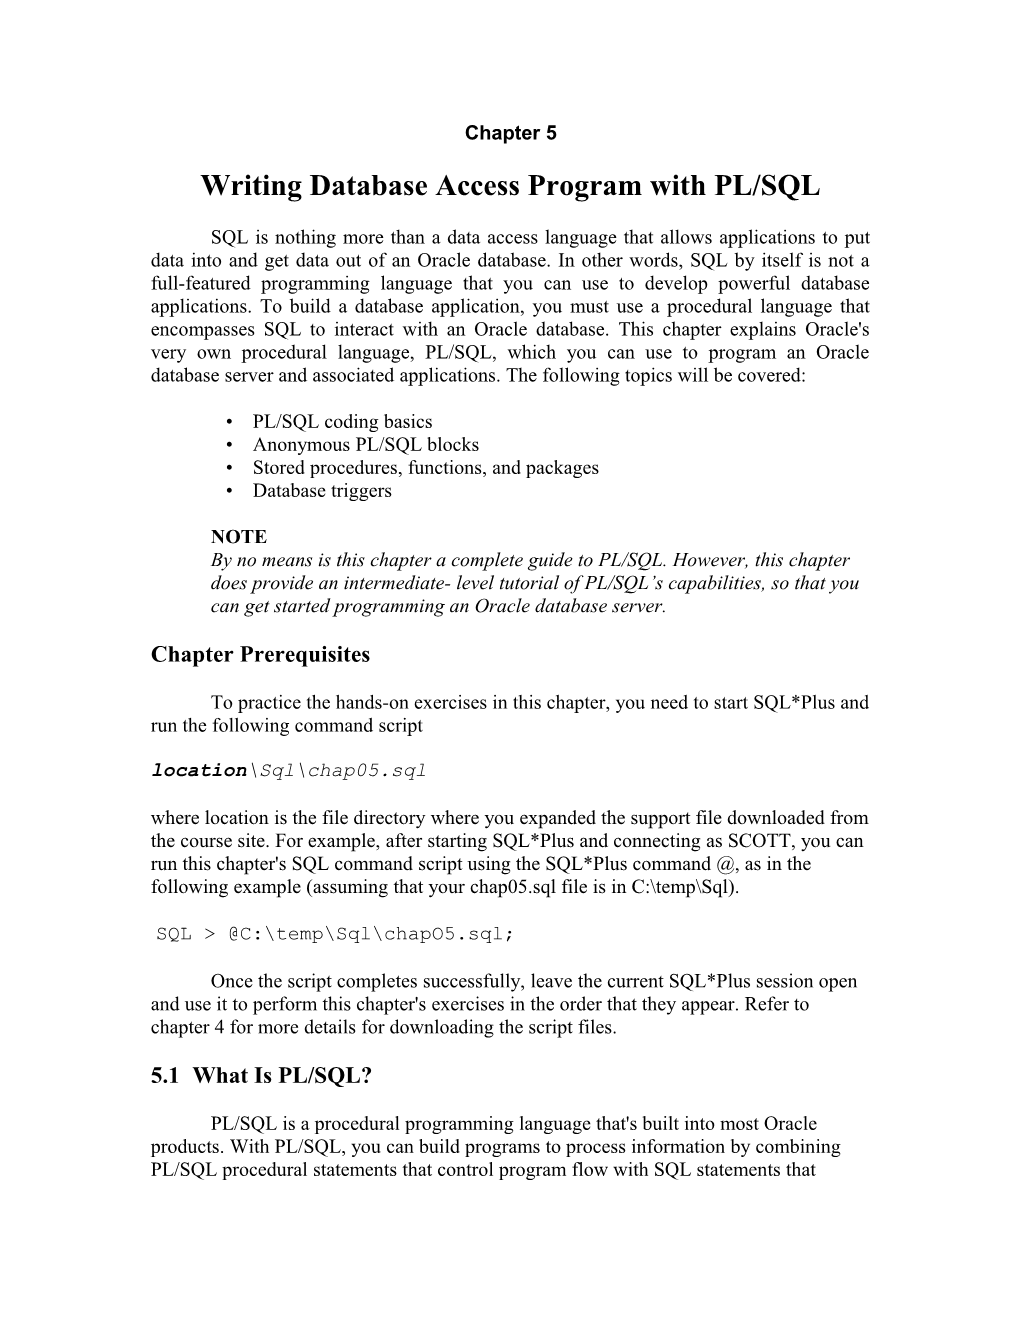 Writing Database Access Program with PL/SQL